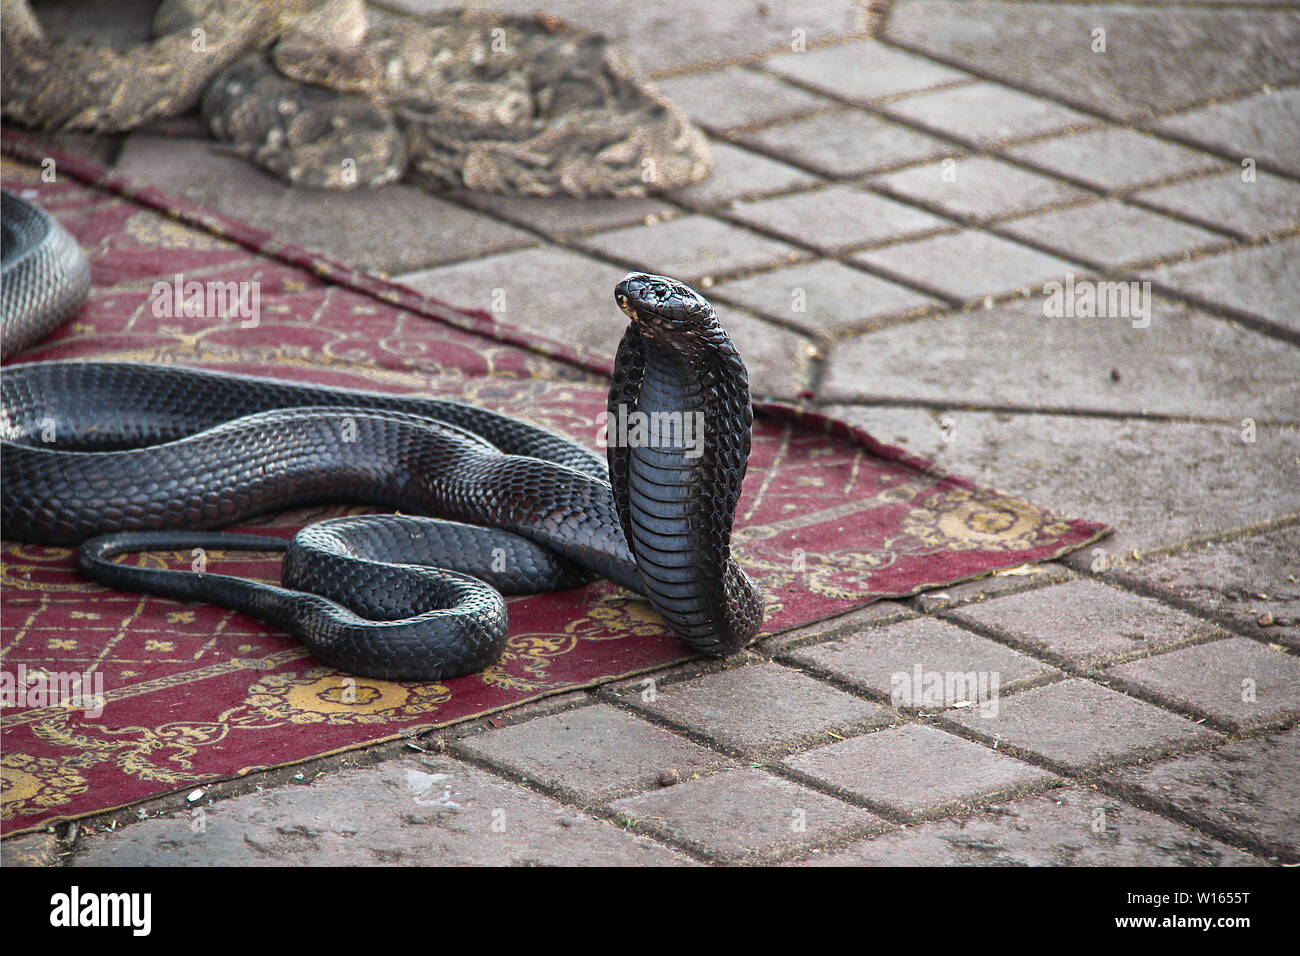 On the floor of the big central place in Marrakech are many snake charmers, like this one. Stock Photo